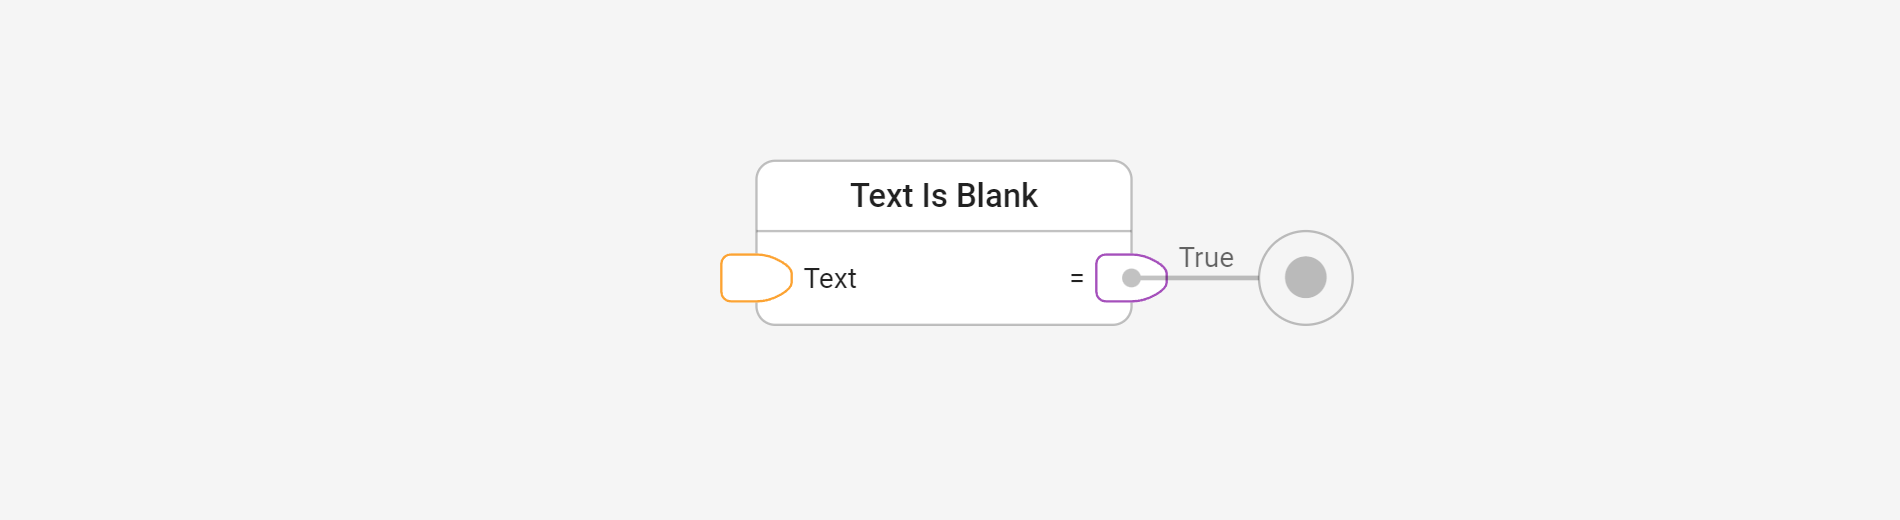 Check text is blank